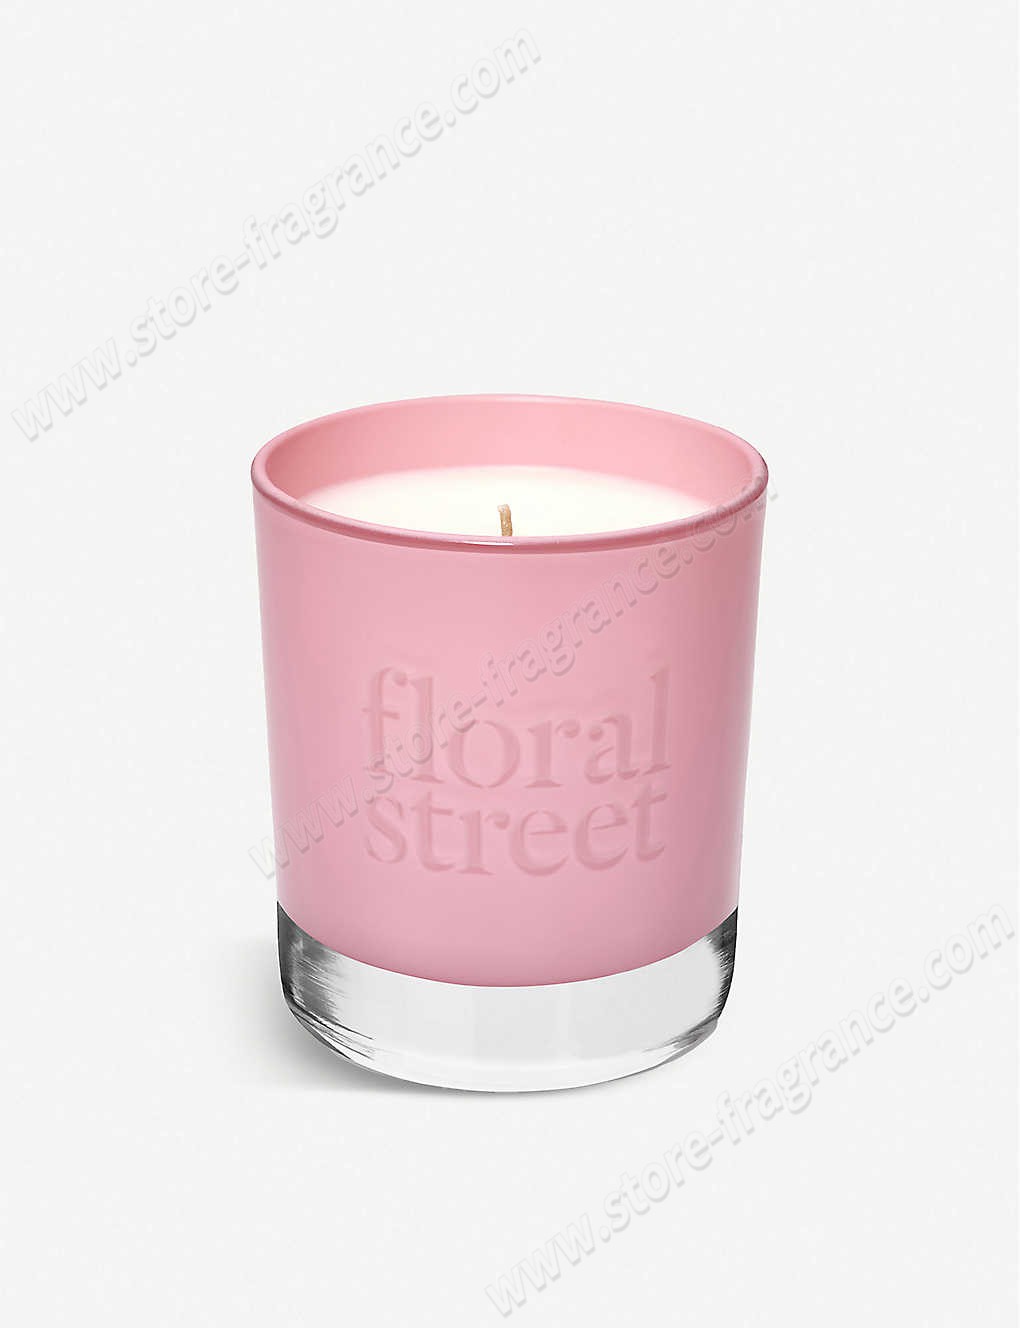 FLORAL STREET/Rose Provence scented candle 200g ✿ Discount Store - -0